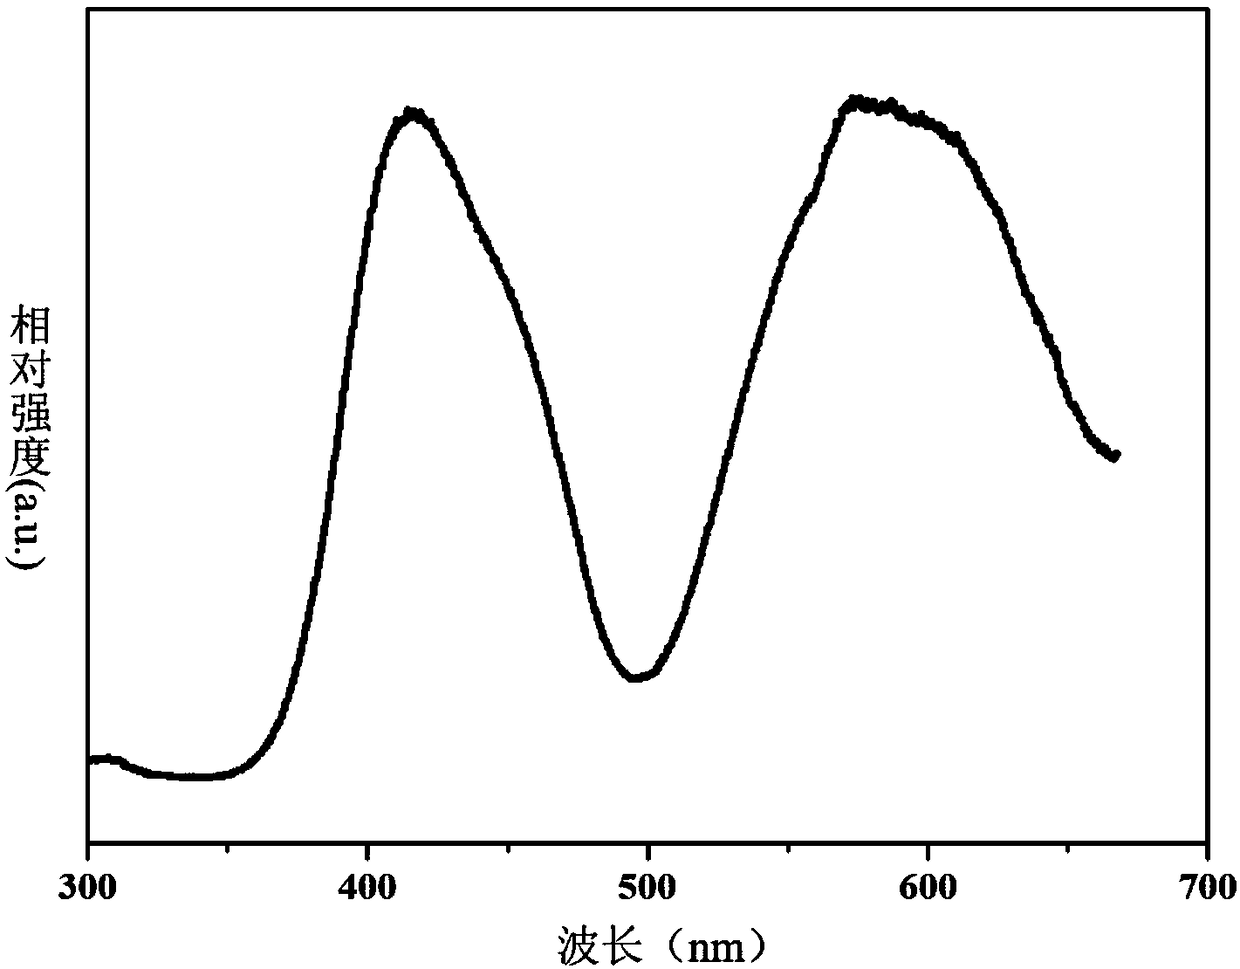 Fluorescent powder material for near-infrared LED (Light Emitting Diode) and preparation method thereof